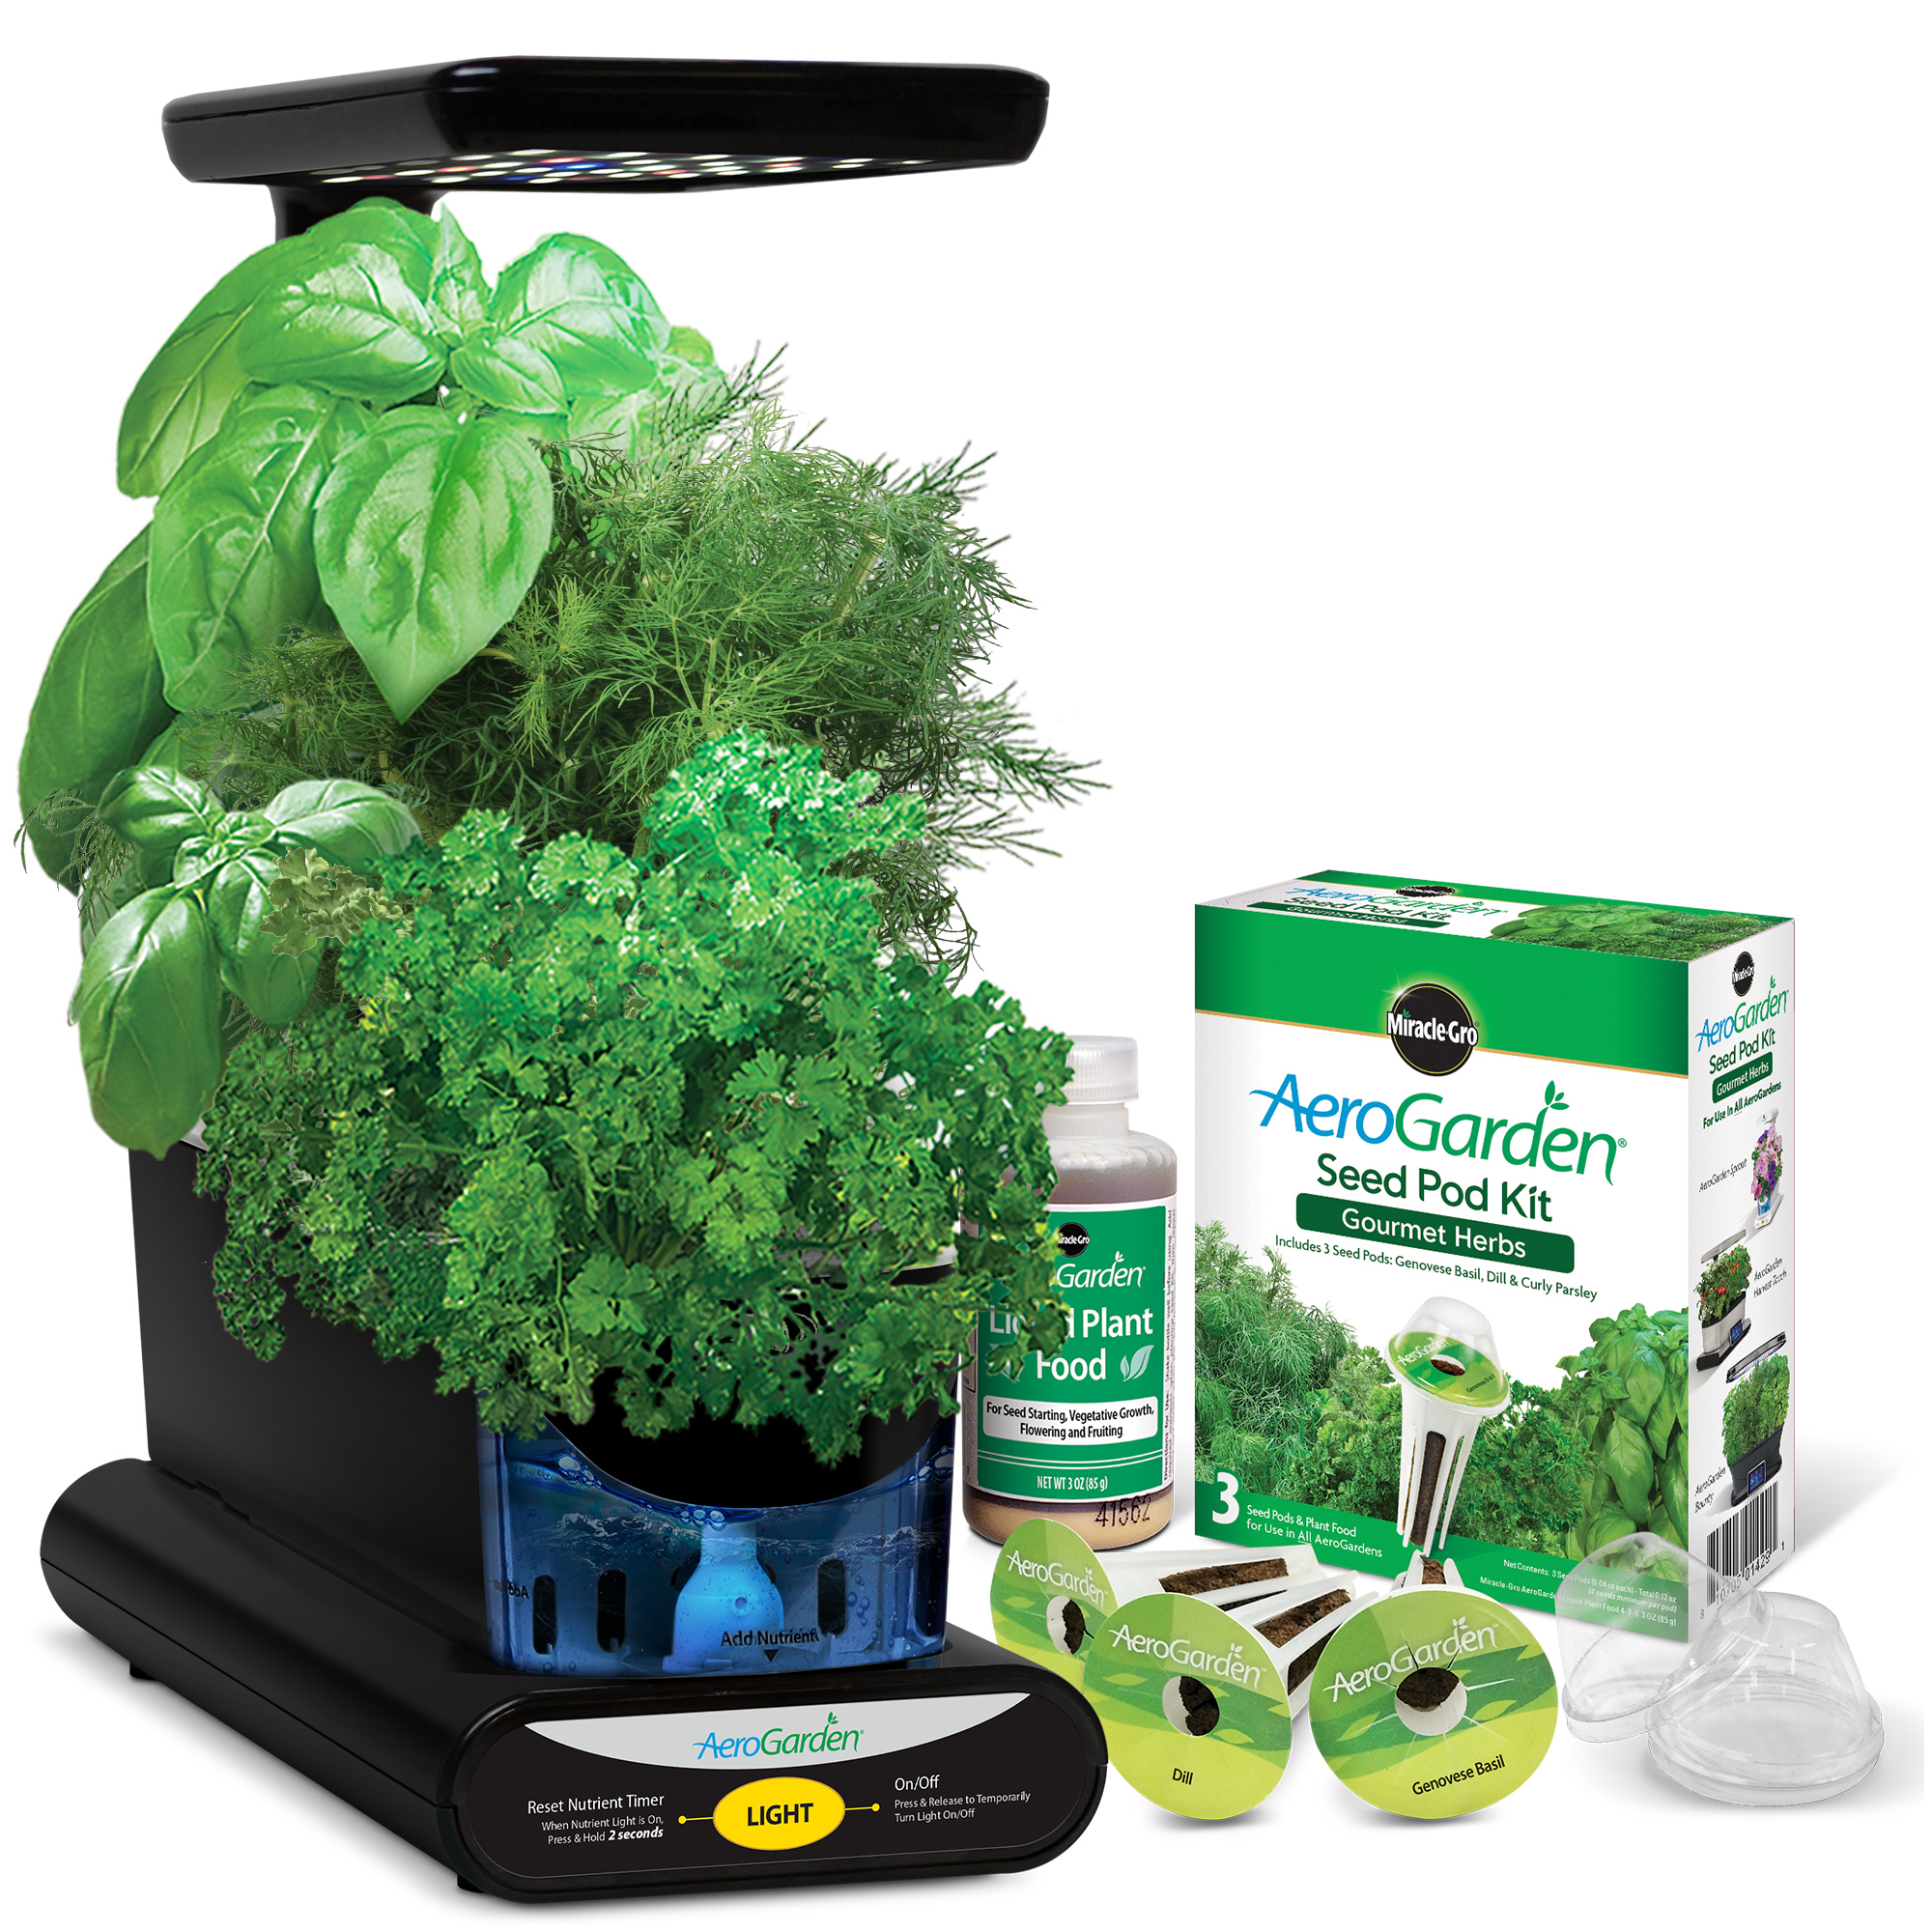 Black Miracle-Gro AeroGarden Sprout Plus LED with Gourmet Herb Seed Pod Kit 